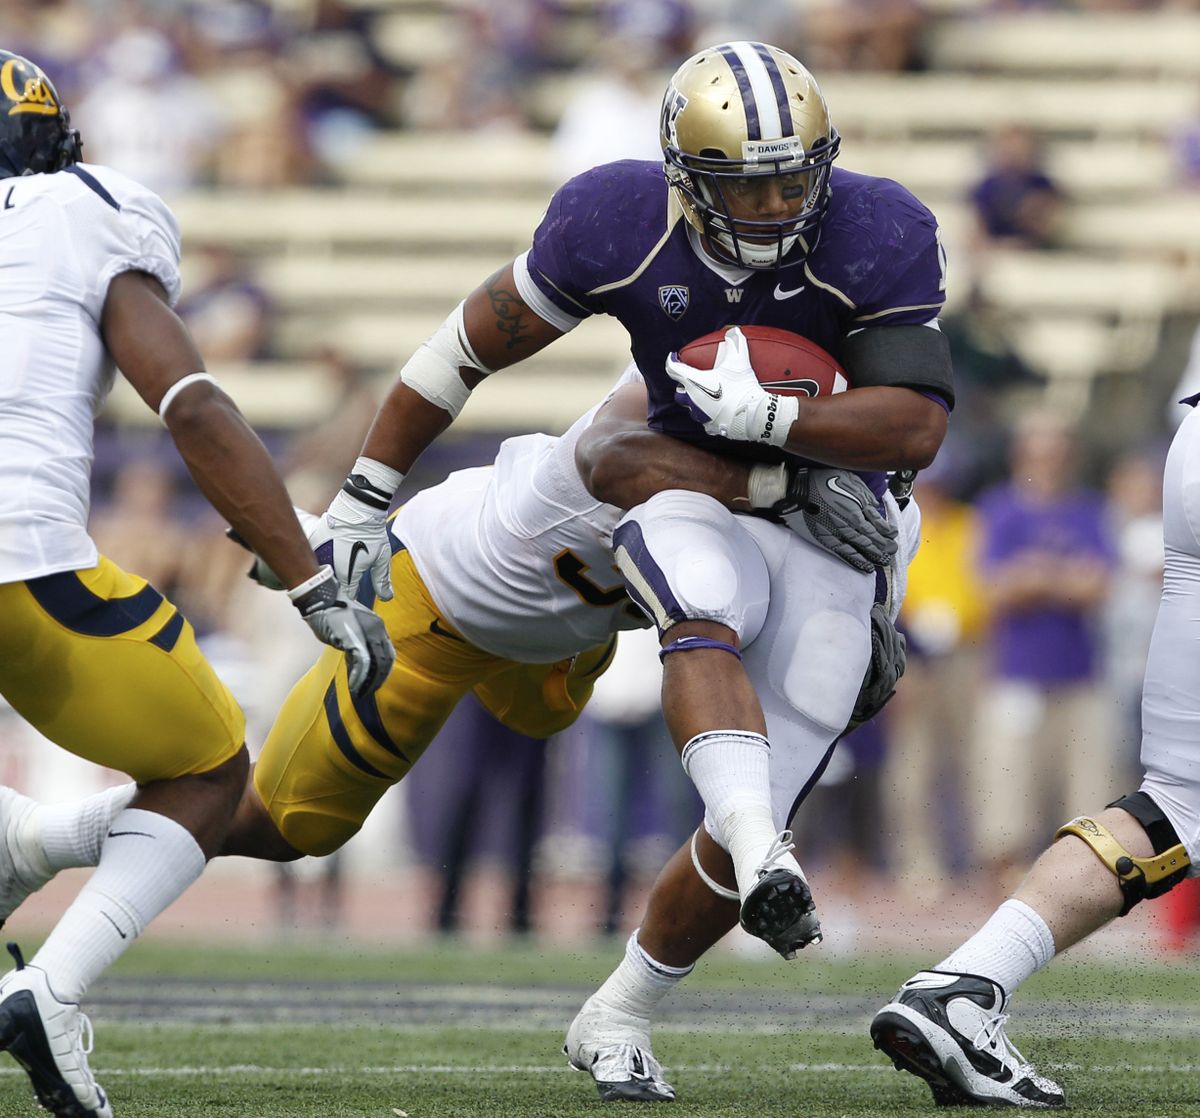 Washington’s Chris Polk entered the weekend with 872 rushing yards, well ahead of the field in the Pac-12. (Associated Press)